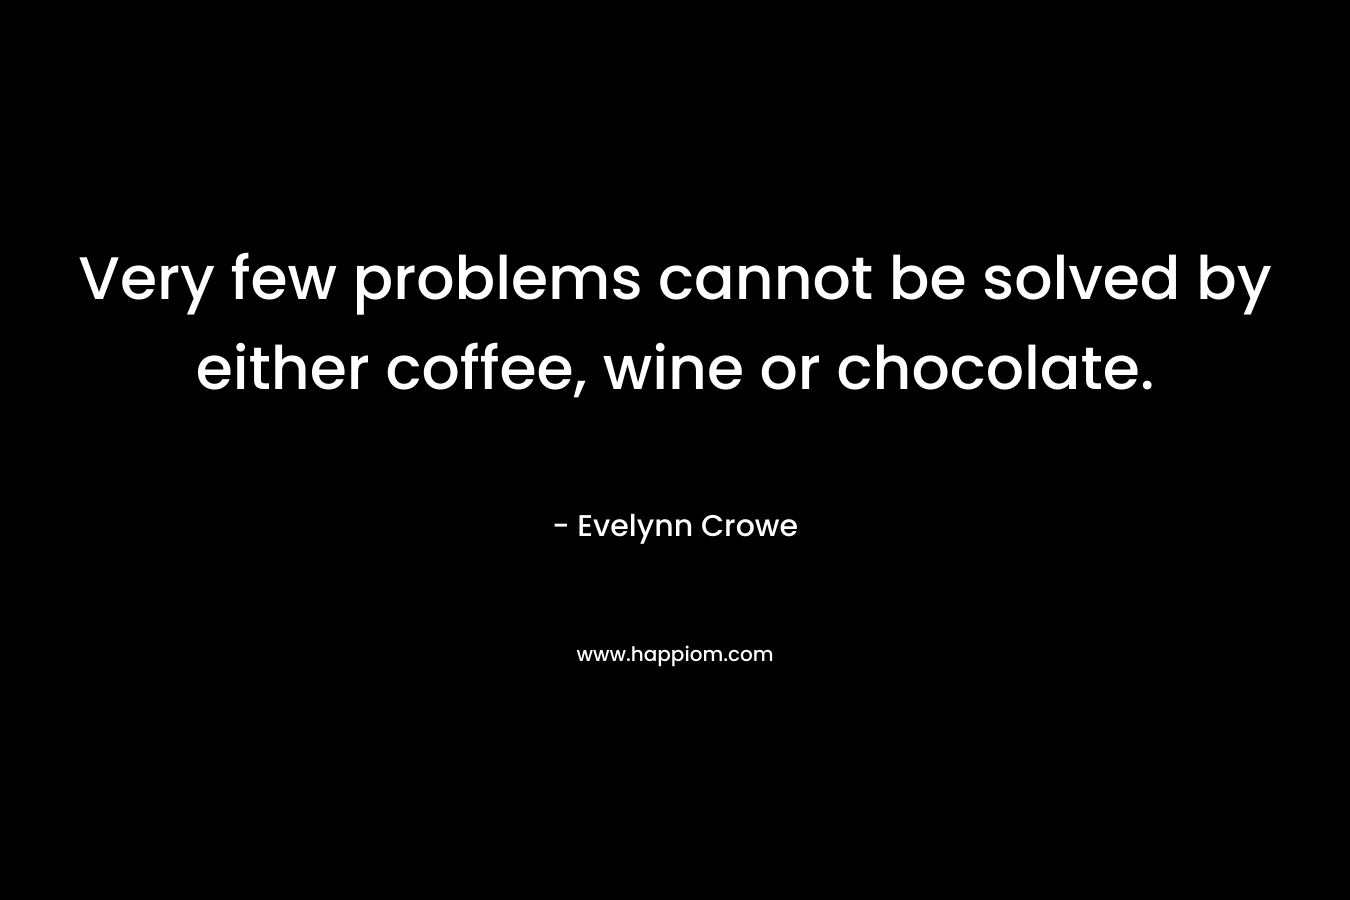 Very few problems cannot be solved by either coffee, wine or chocolate. – Evelynn Crowe